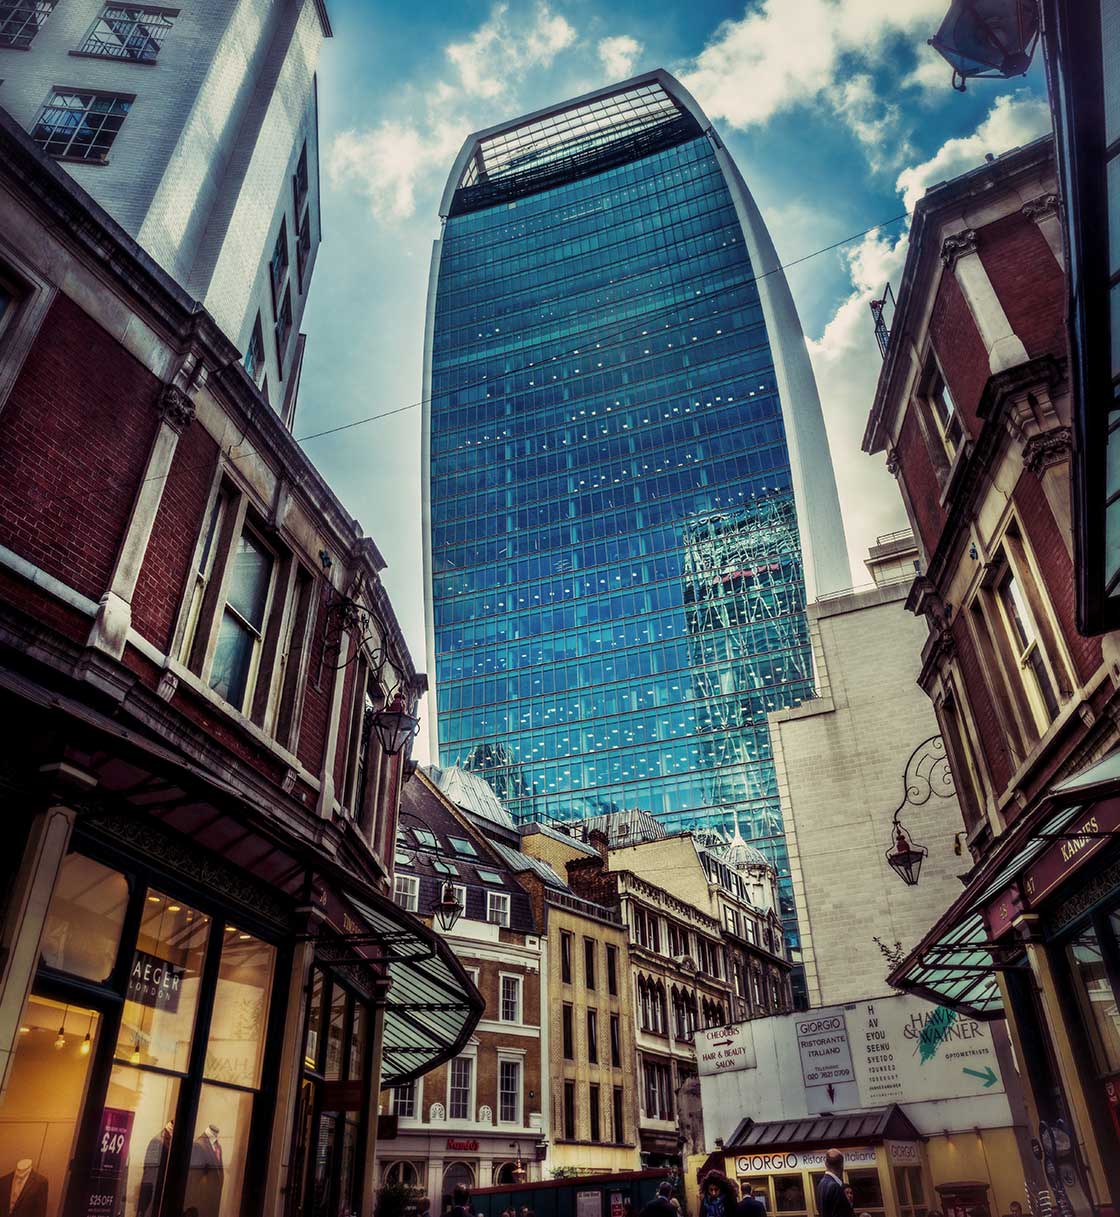 Walkie Talkie, London. The nickname for a skyscraper at Fenchurch Street in London, which earned the additional nickname “death ray”, and which was reported to be damaging neighbouring buildings and parked cars due to reflected light.